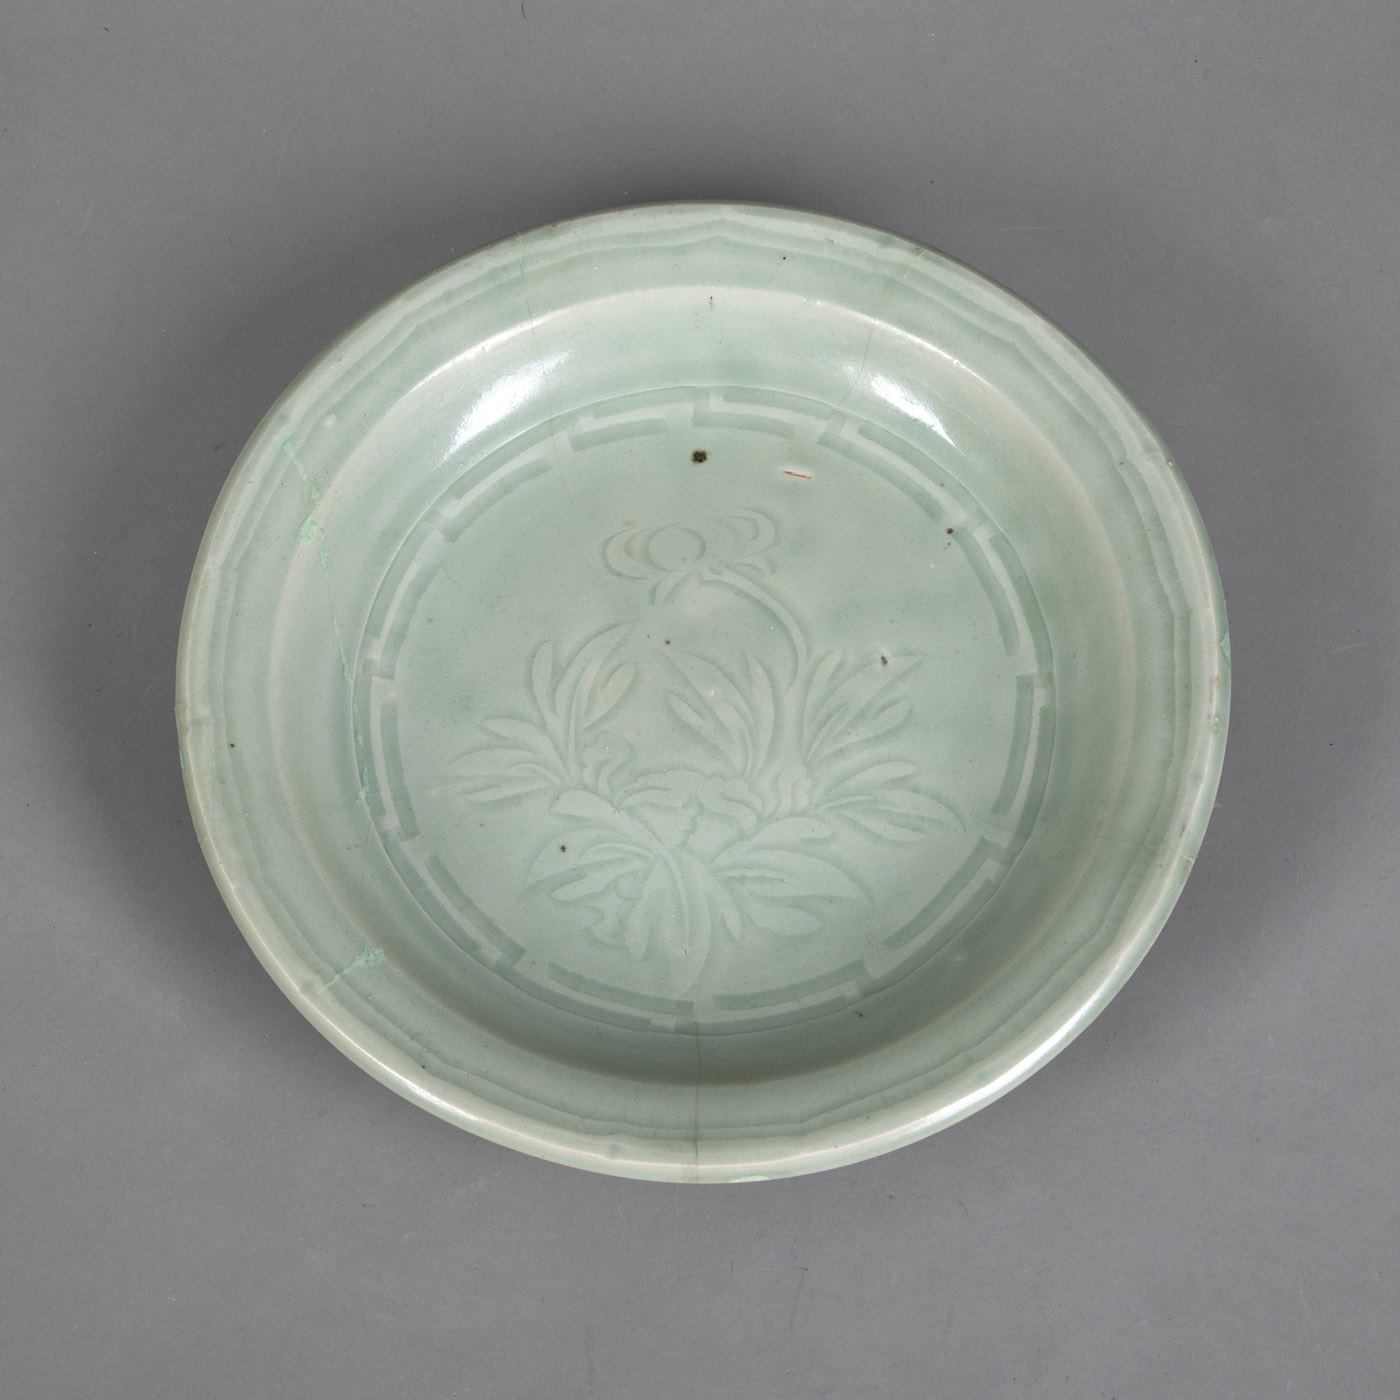 <b>A LARGE LONGQUAN CELADON PLAT WITH INCISED FLORAL DECORATION</b>